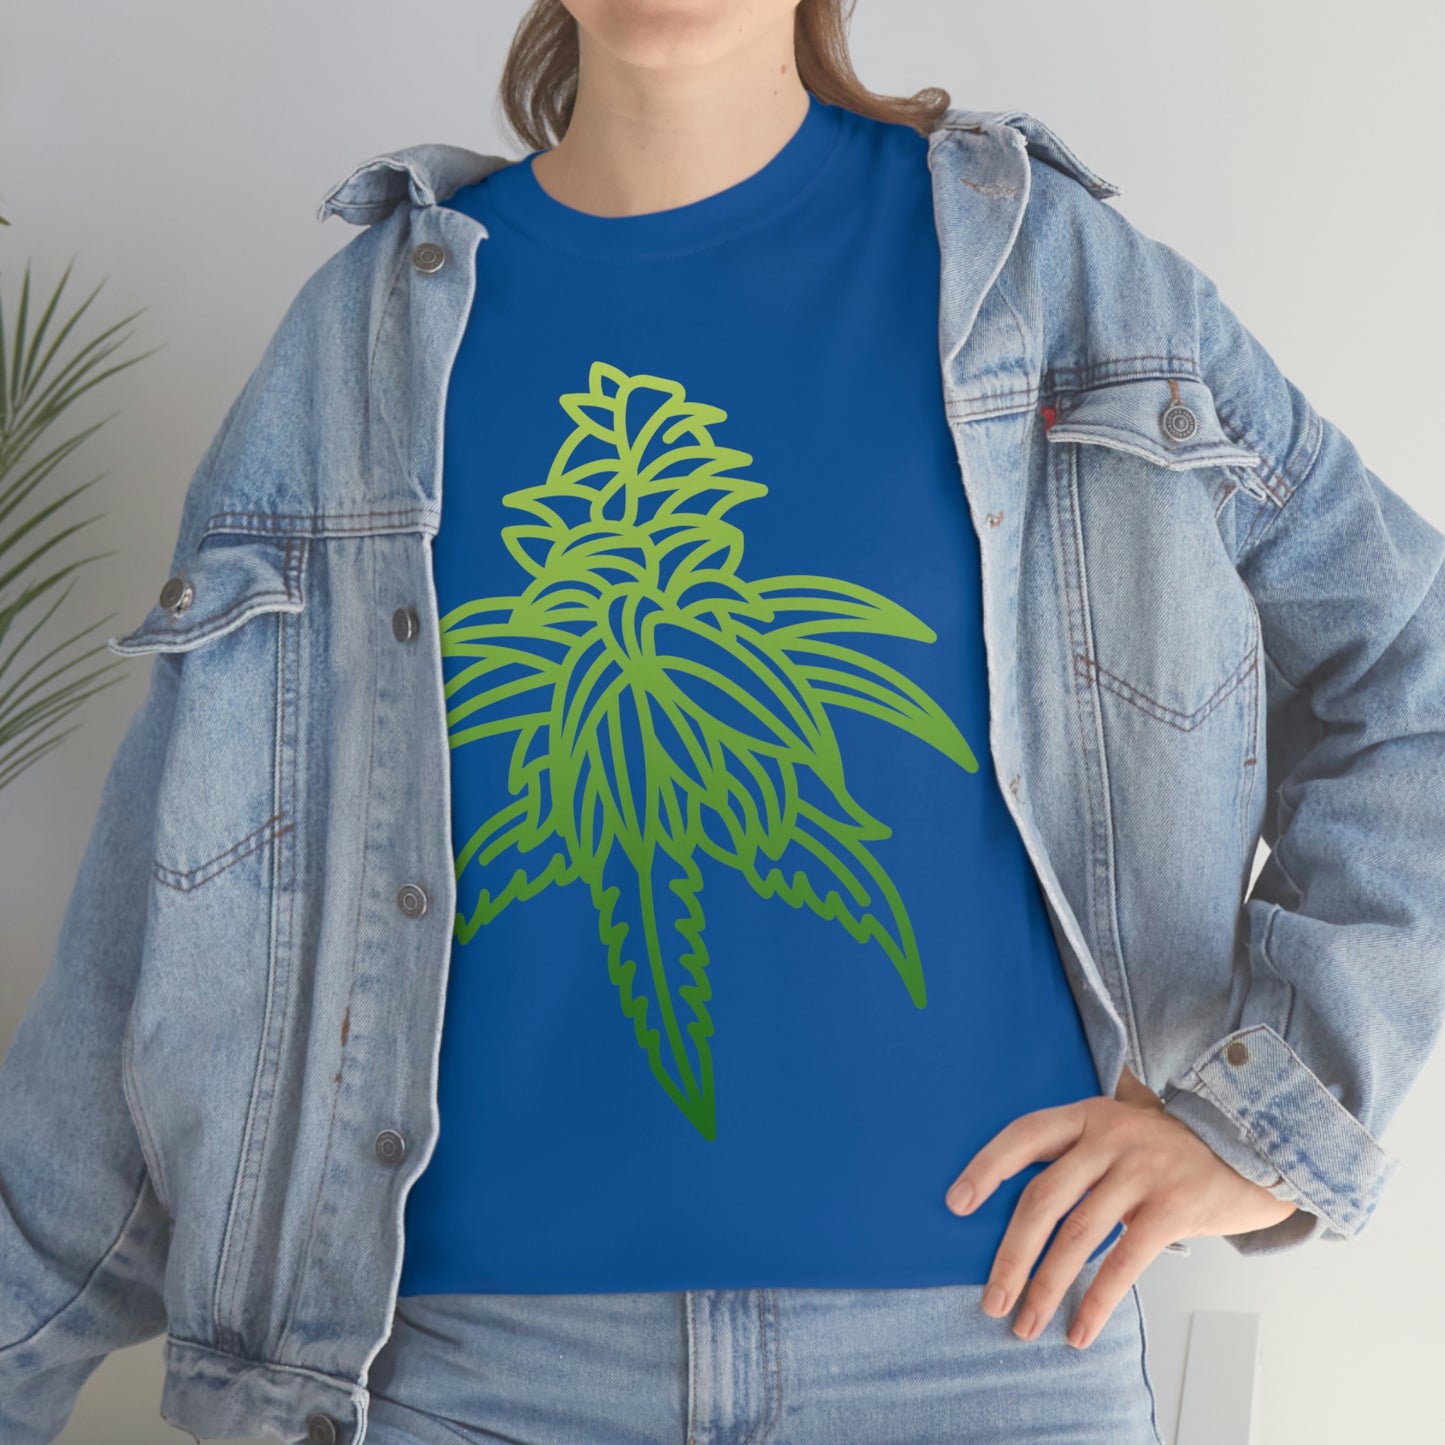 a woman wearing a Sour Diesel Cannabis Tee and jeans.